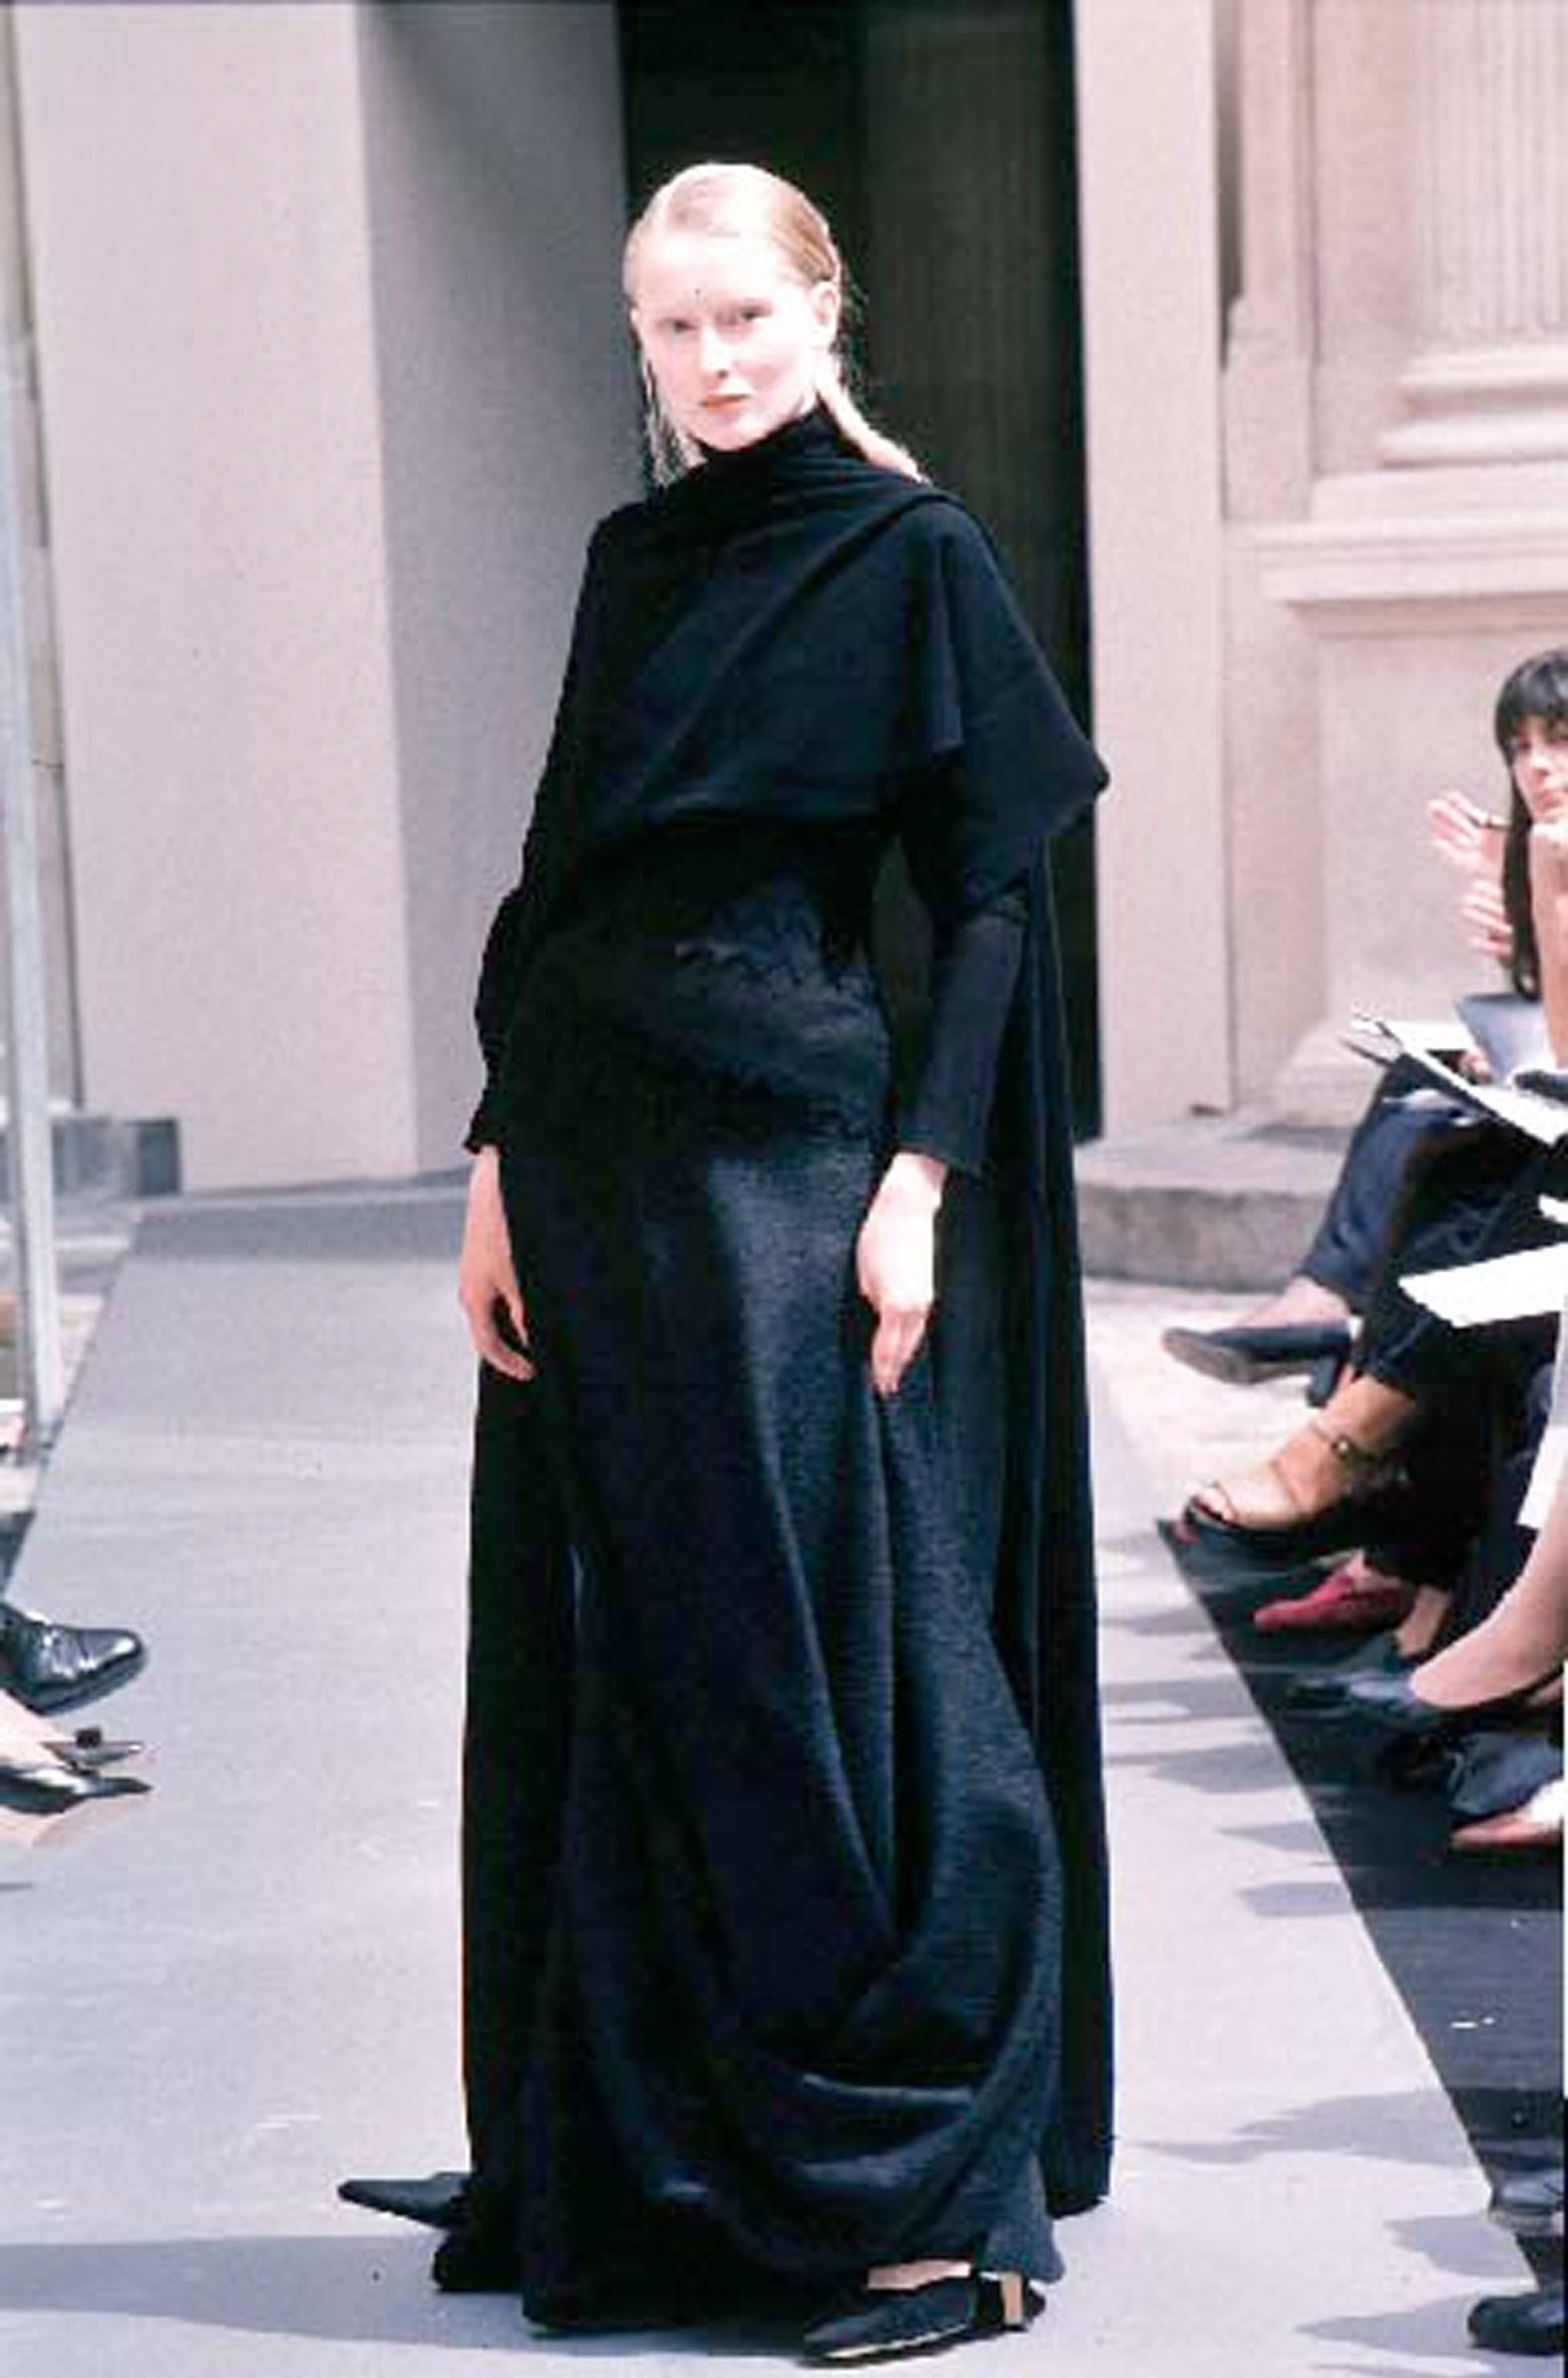 Presenting an extraordinary piece from Ocimar Versolato's Haute Couture Autumn-Winter 1998 collection, the black bouclé wool and knitted lace evening dress, a true embodiment of the designer's visionary approach to fashion.

This dress exudes